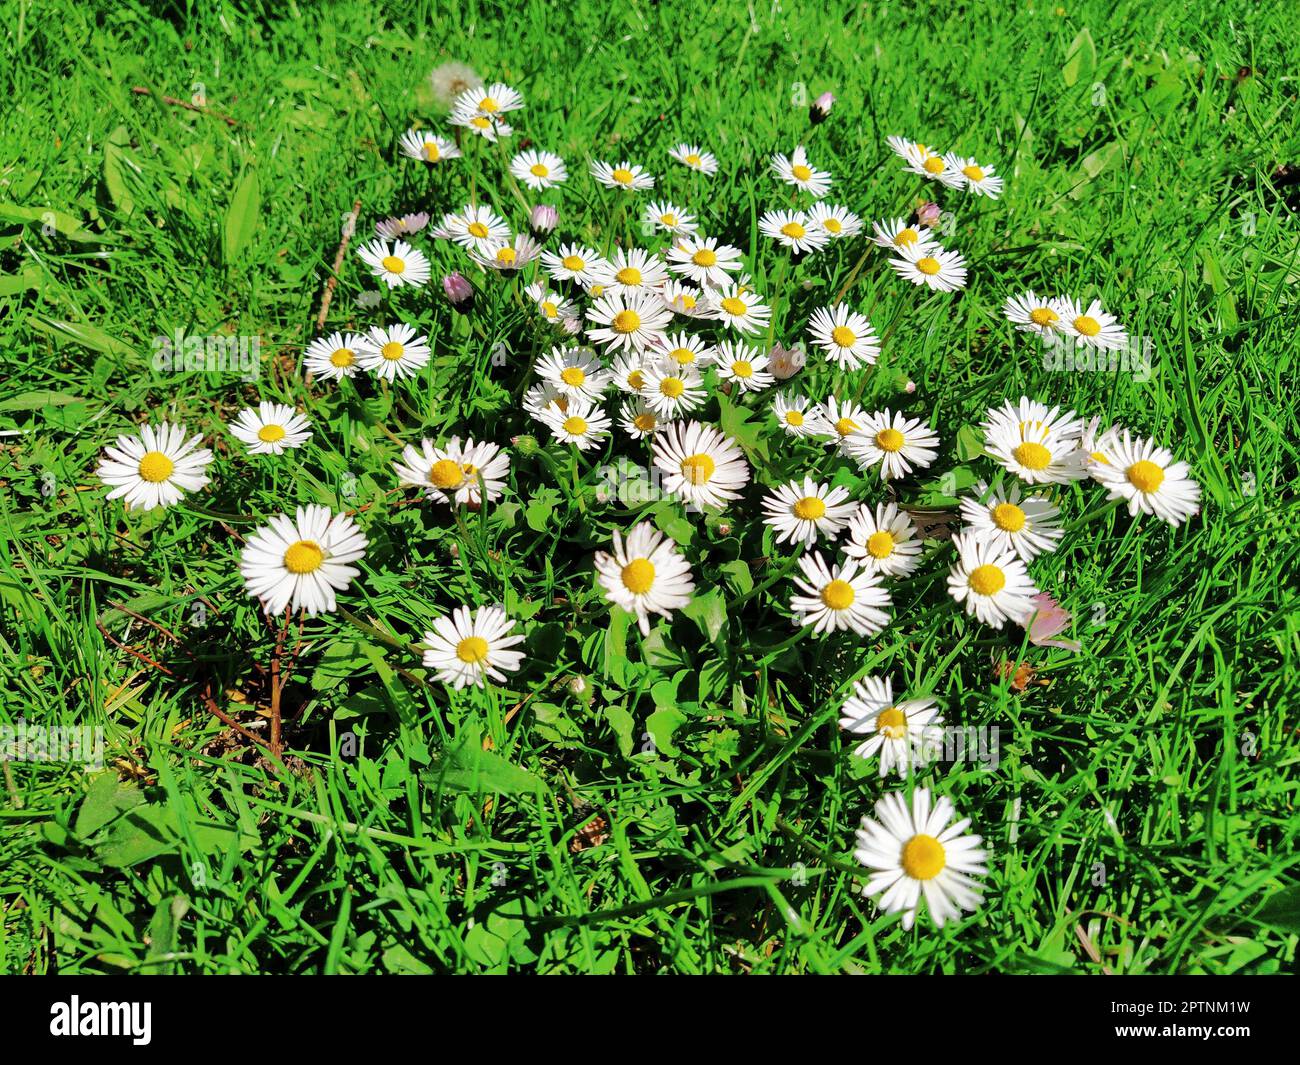 Daisy or ox-eye daisy, Bellis is a genus of perennial plants from the Asteraceae family. Small herbaceous plants, Daisy perennial Bellis perennis. Gre Stock Photo